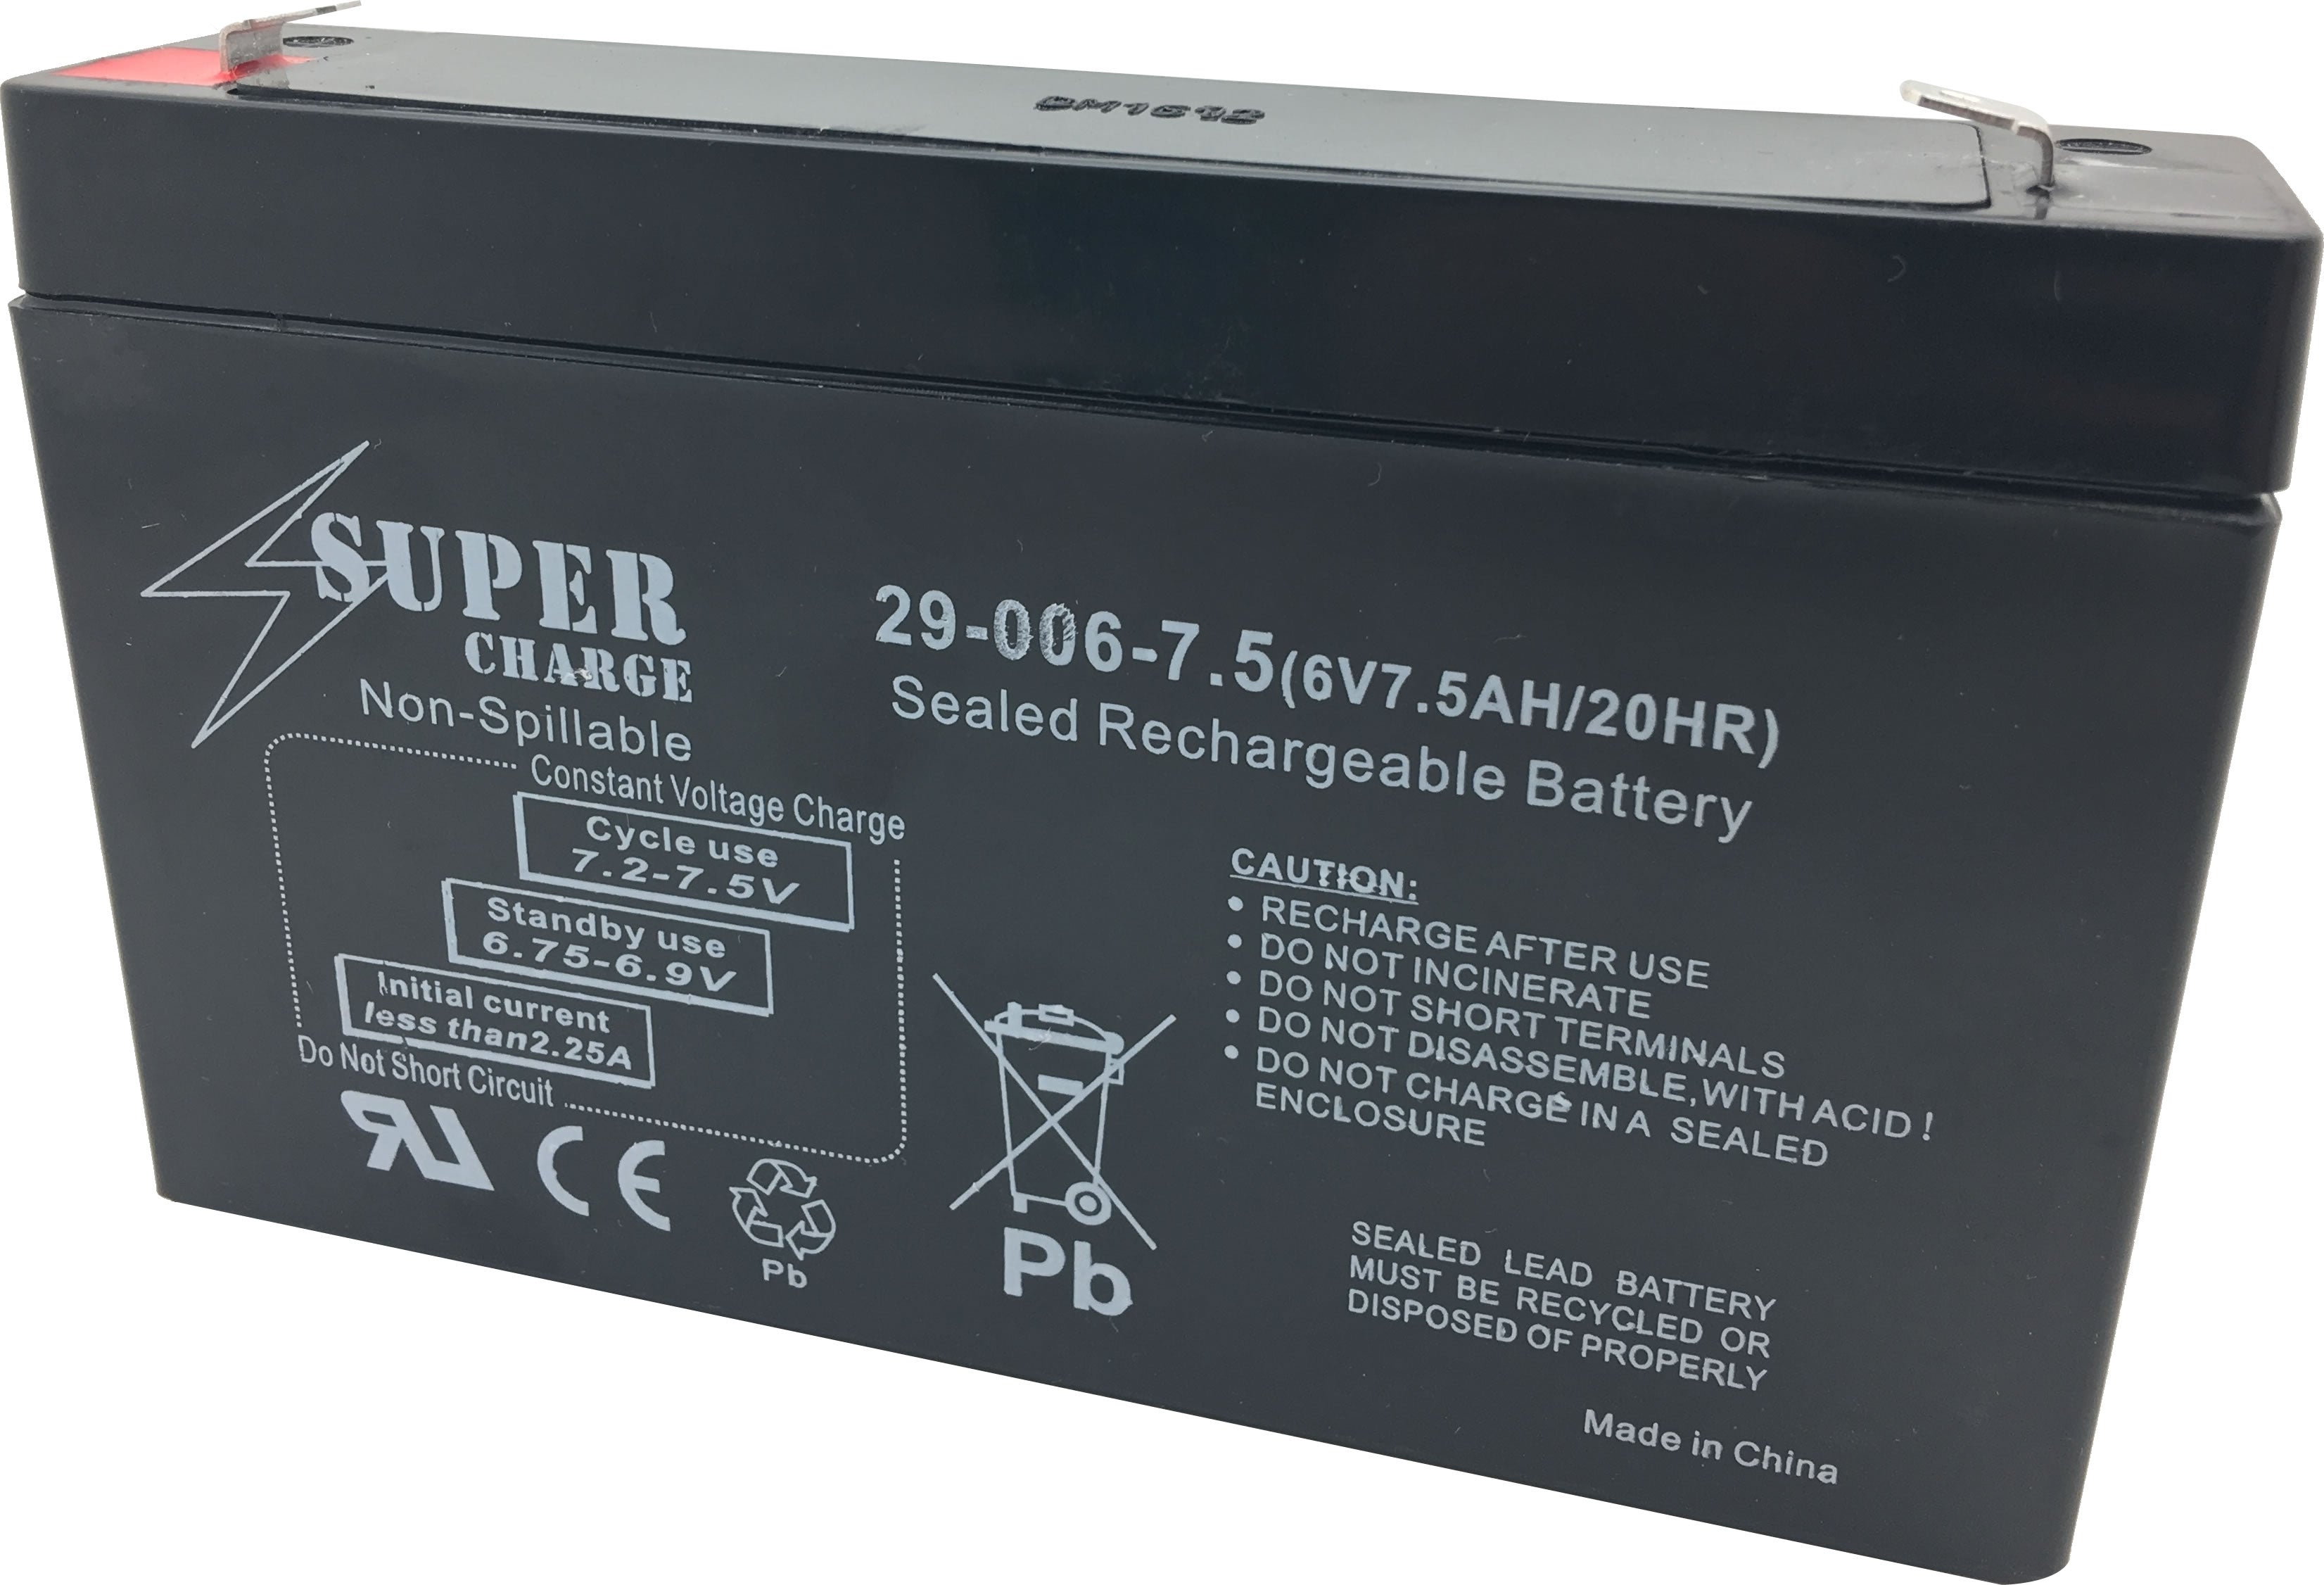 29-006-7.5 Rechargeable Battery 6V 7.5AH 20HR